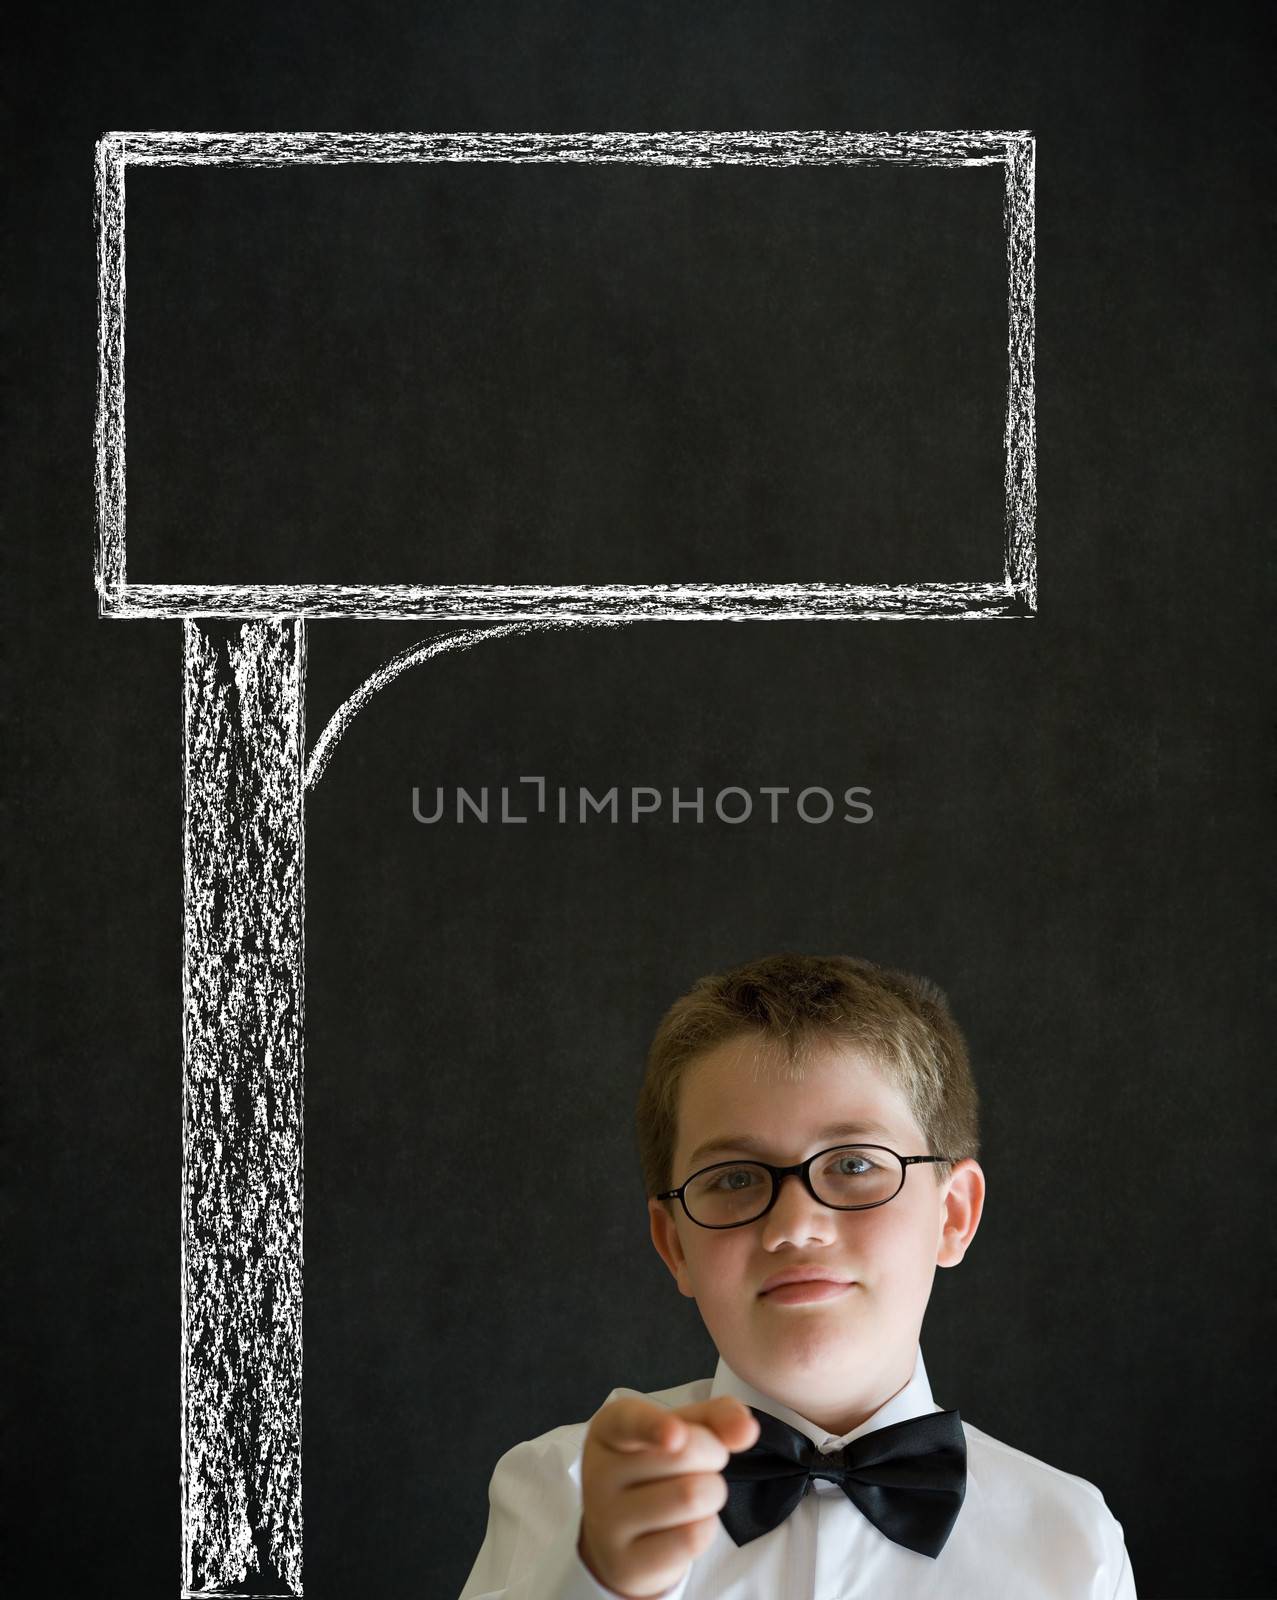 Education needs you thinking boy dressed up as business man with chalk road advertising sign on blackboard background